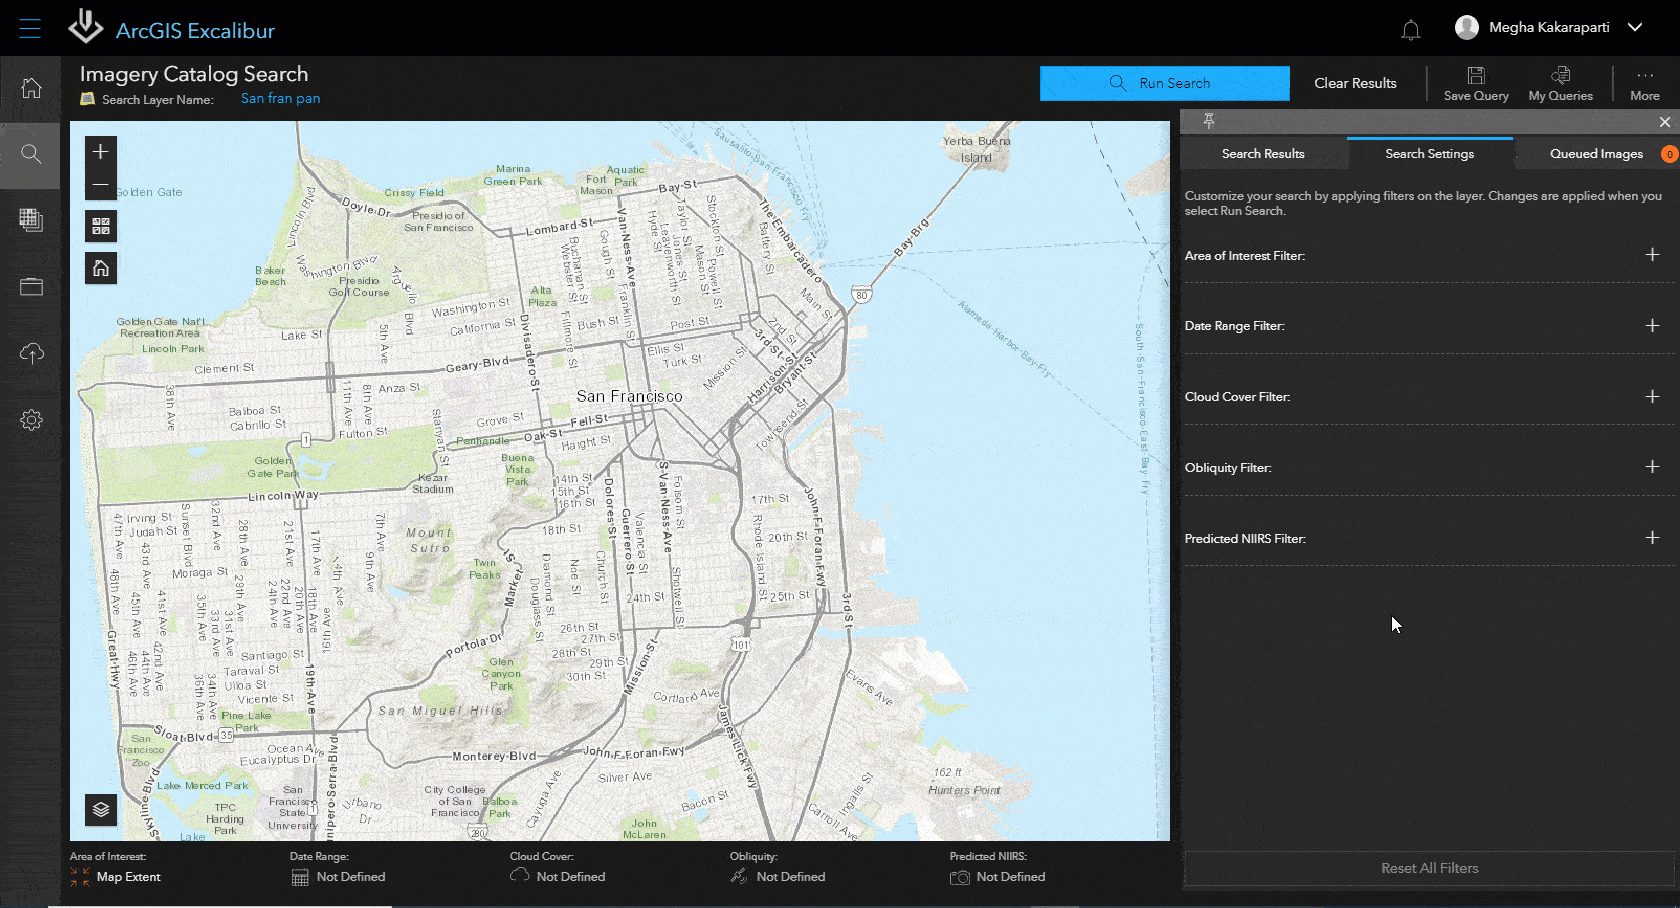 Imagery catalog search feature in ArcGIS Excalibur